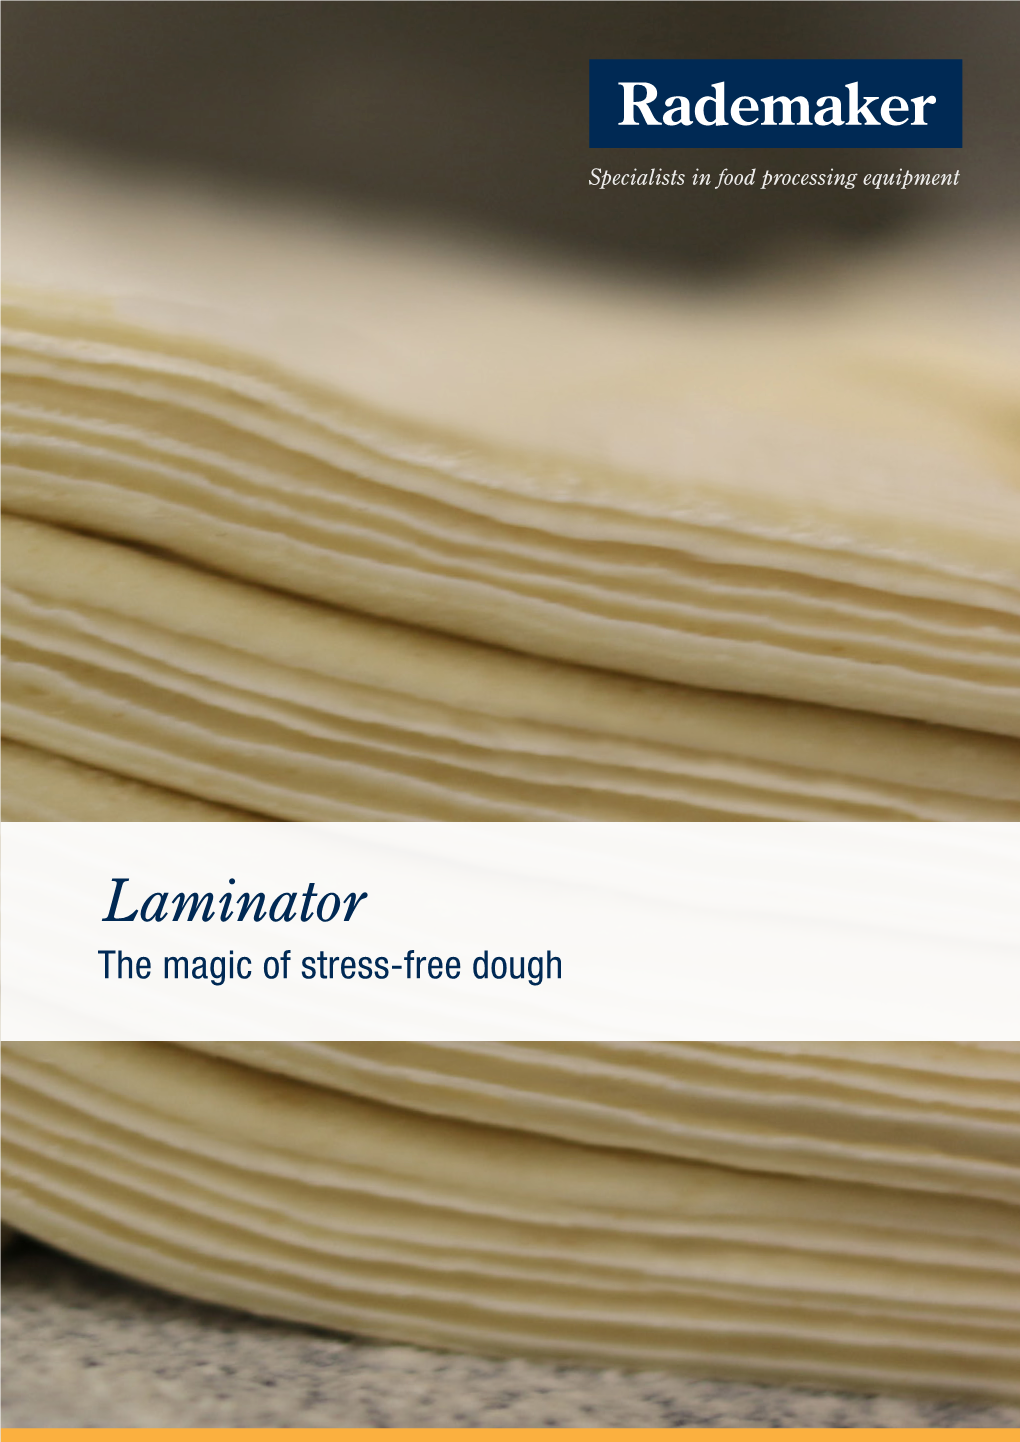 Laminator the Magic of Stress-Free Dough Introduction the Sweet Taste of Laminated Continuous Improvement Delicacies and Innovation